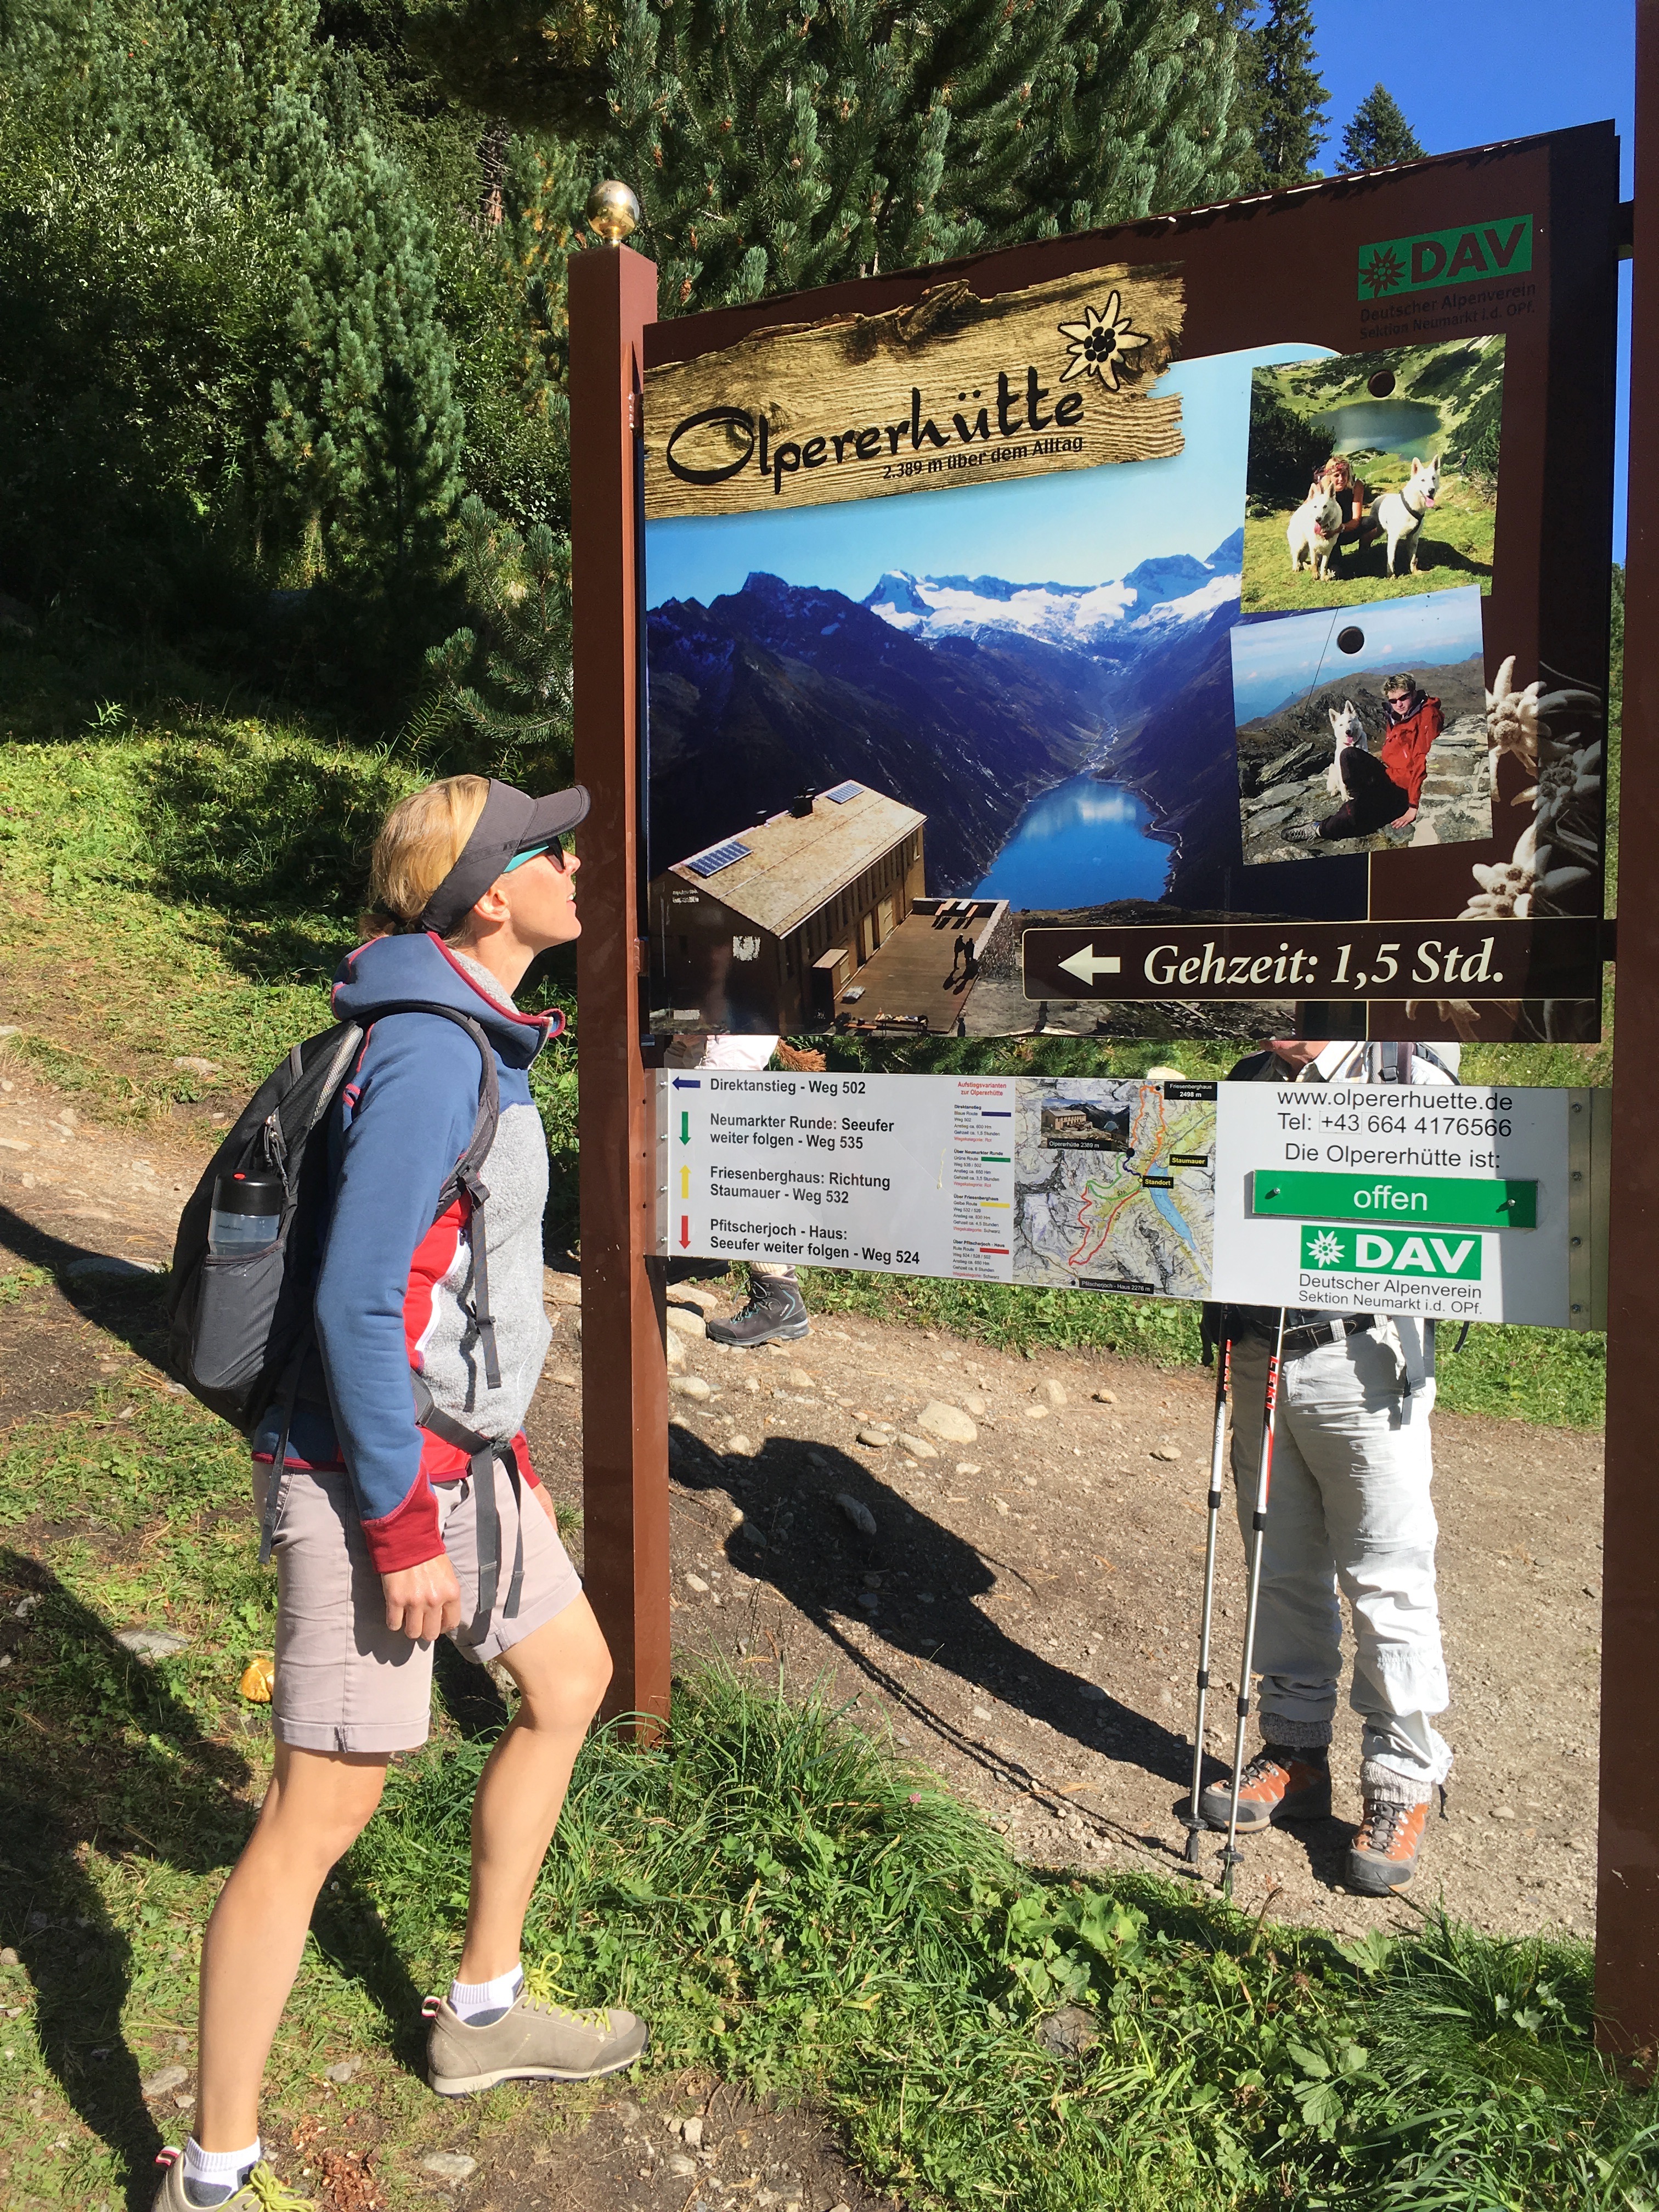 Starting point of the most direct hike to Olpererhütte